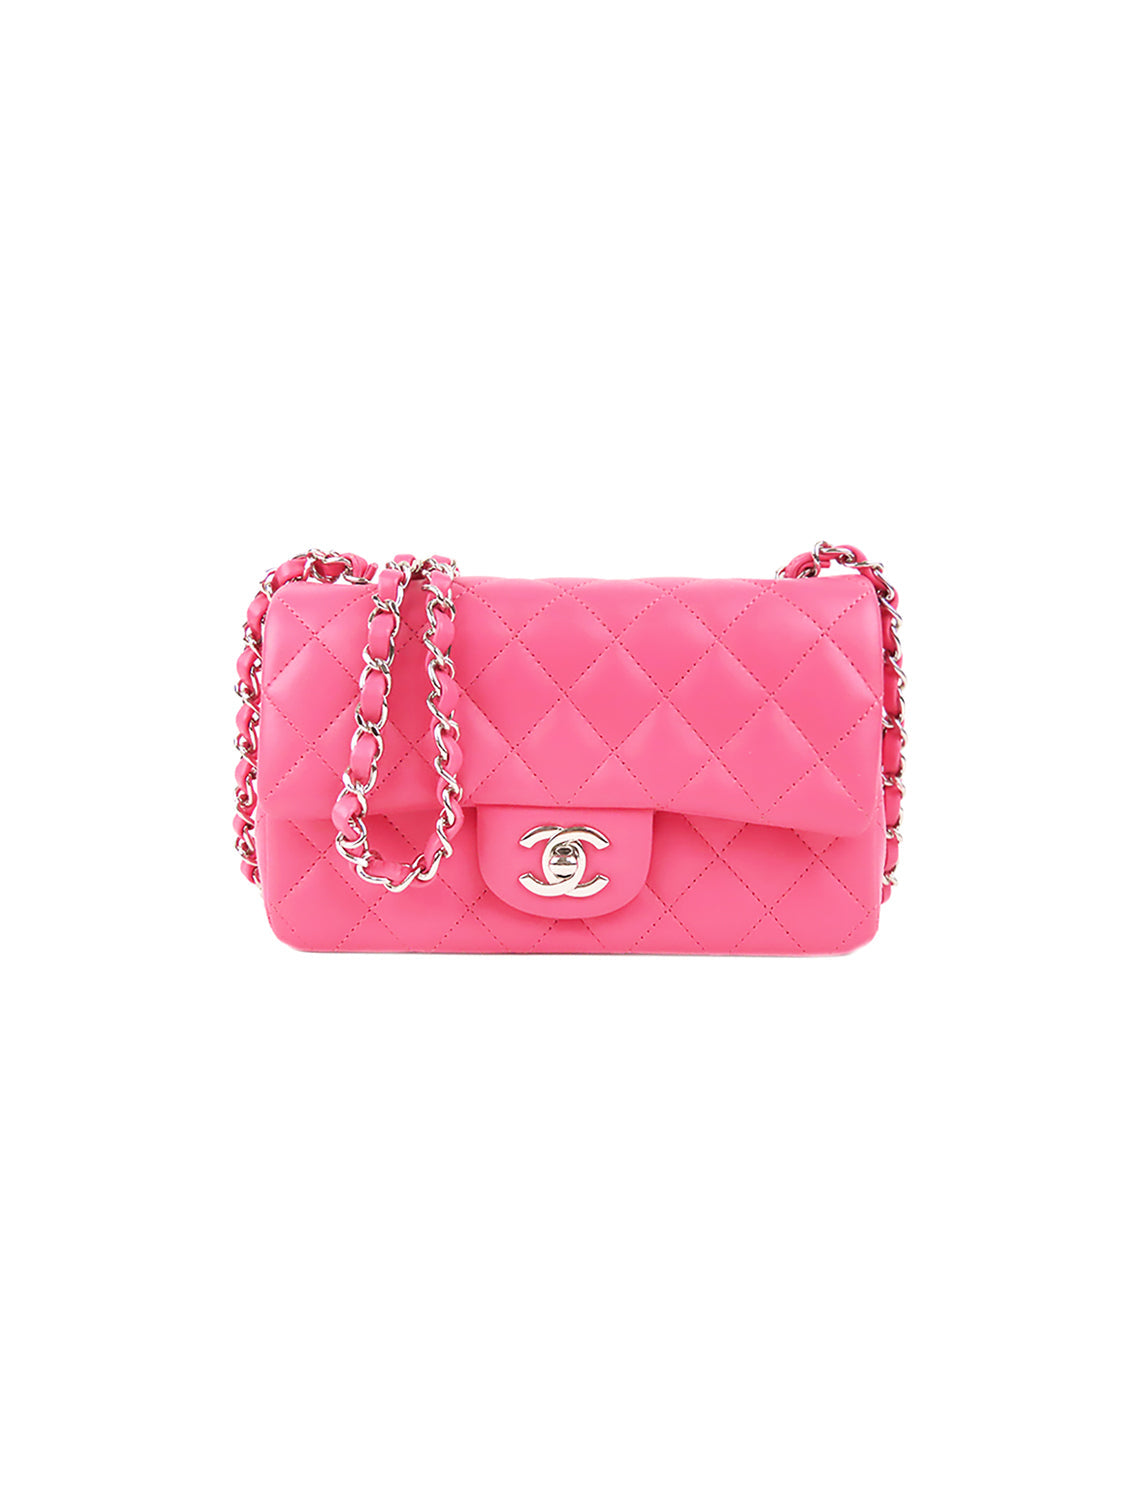 Chanel 2018/2019 Pink Flap